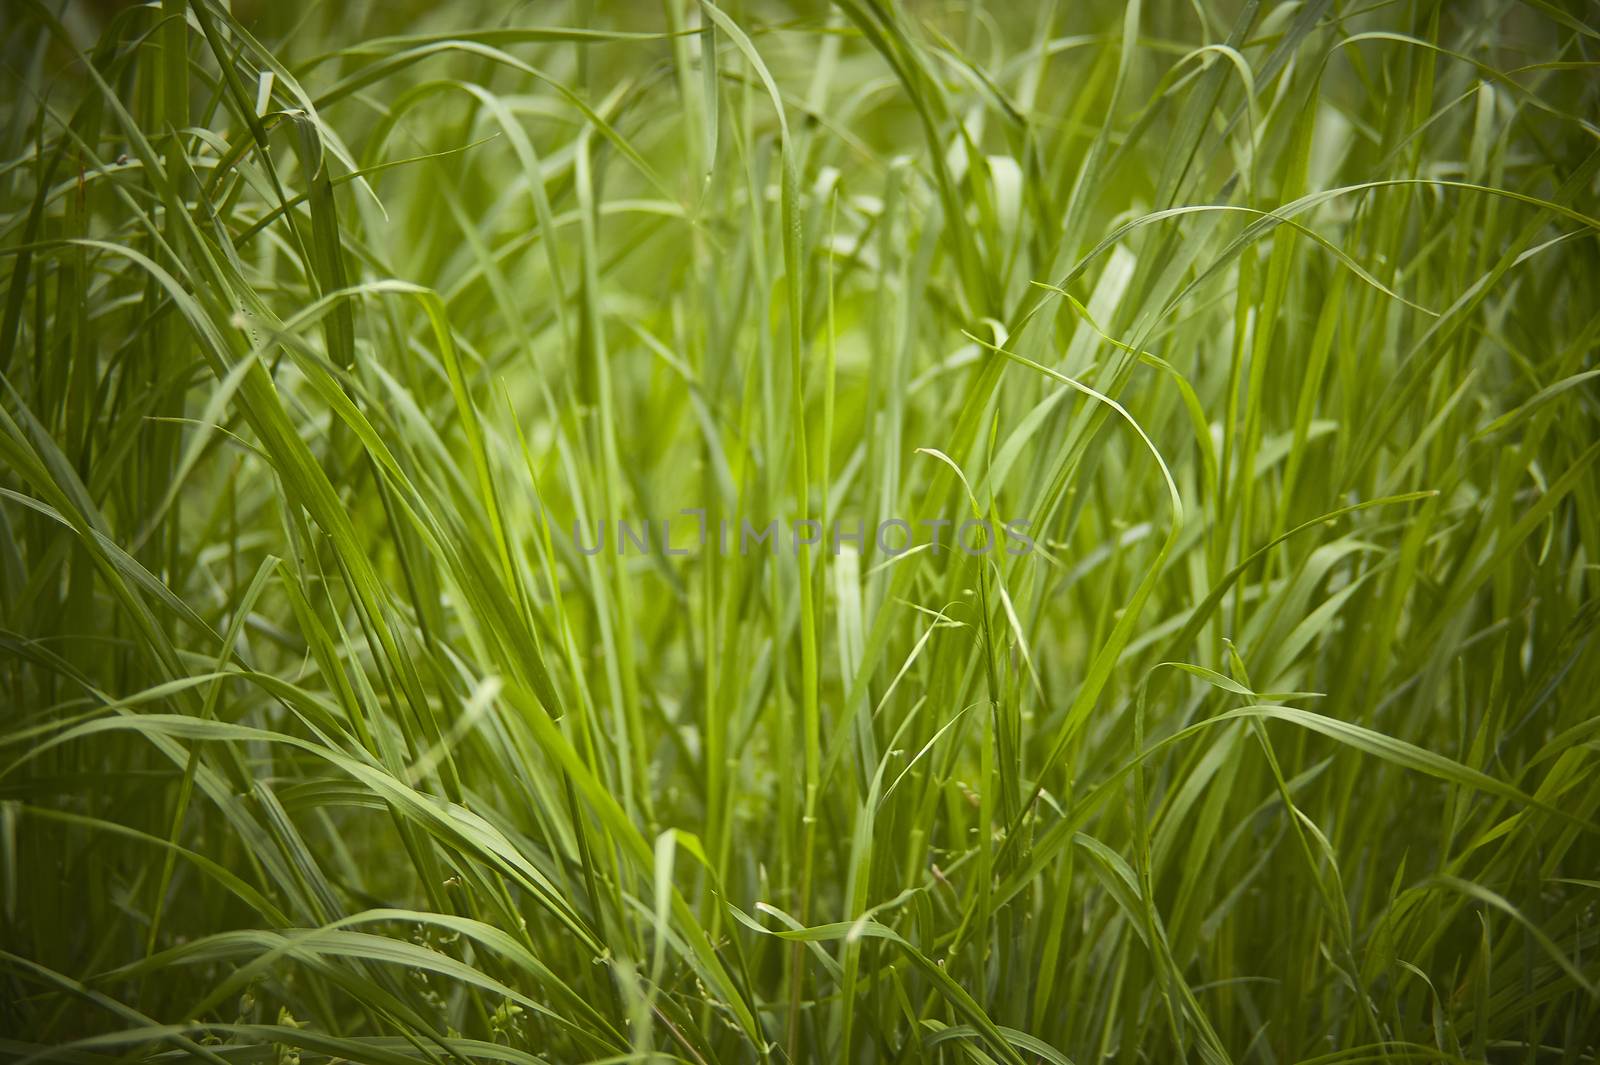 Closeup of a clump of grass in lush growth in the spring period.